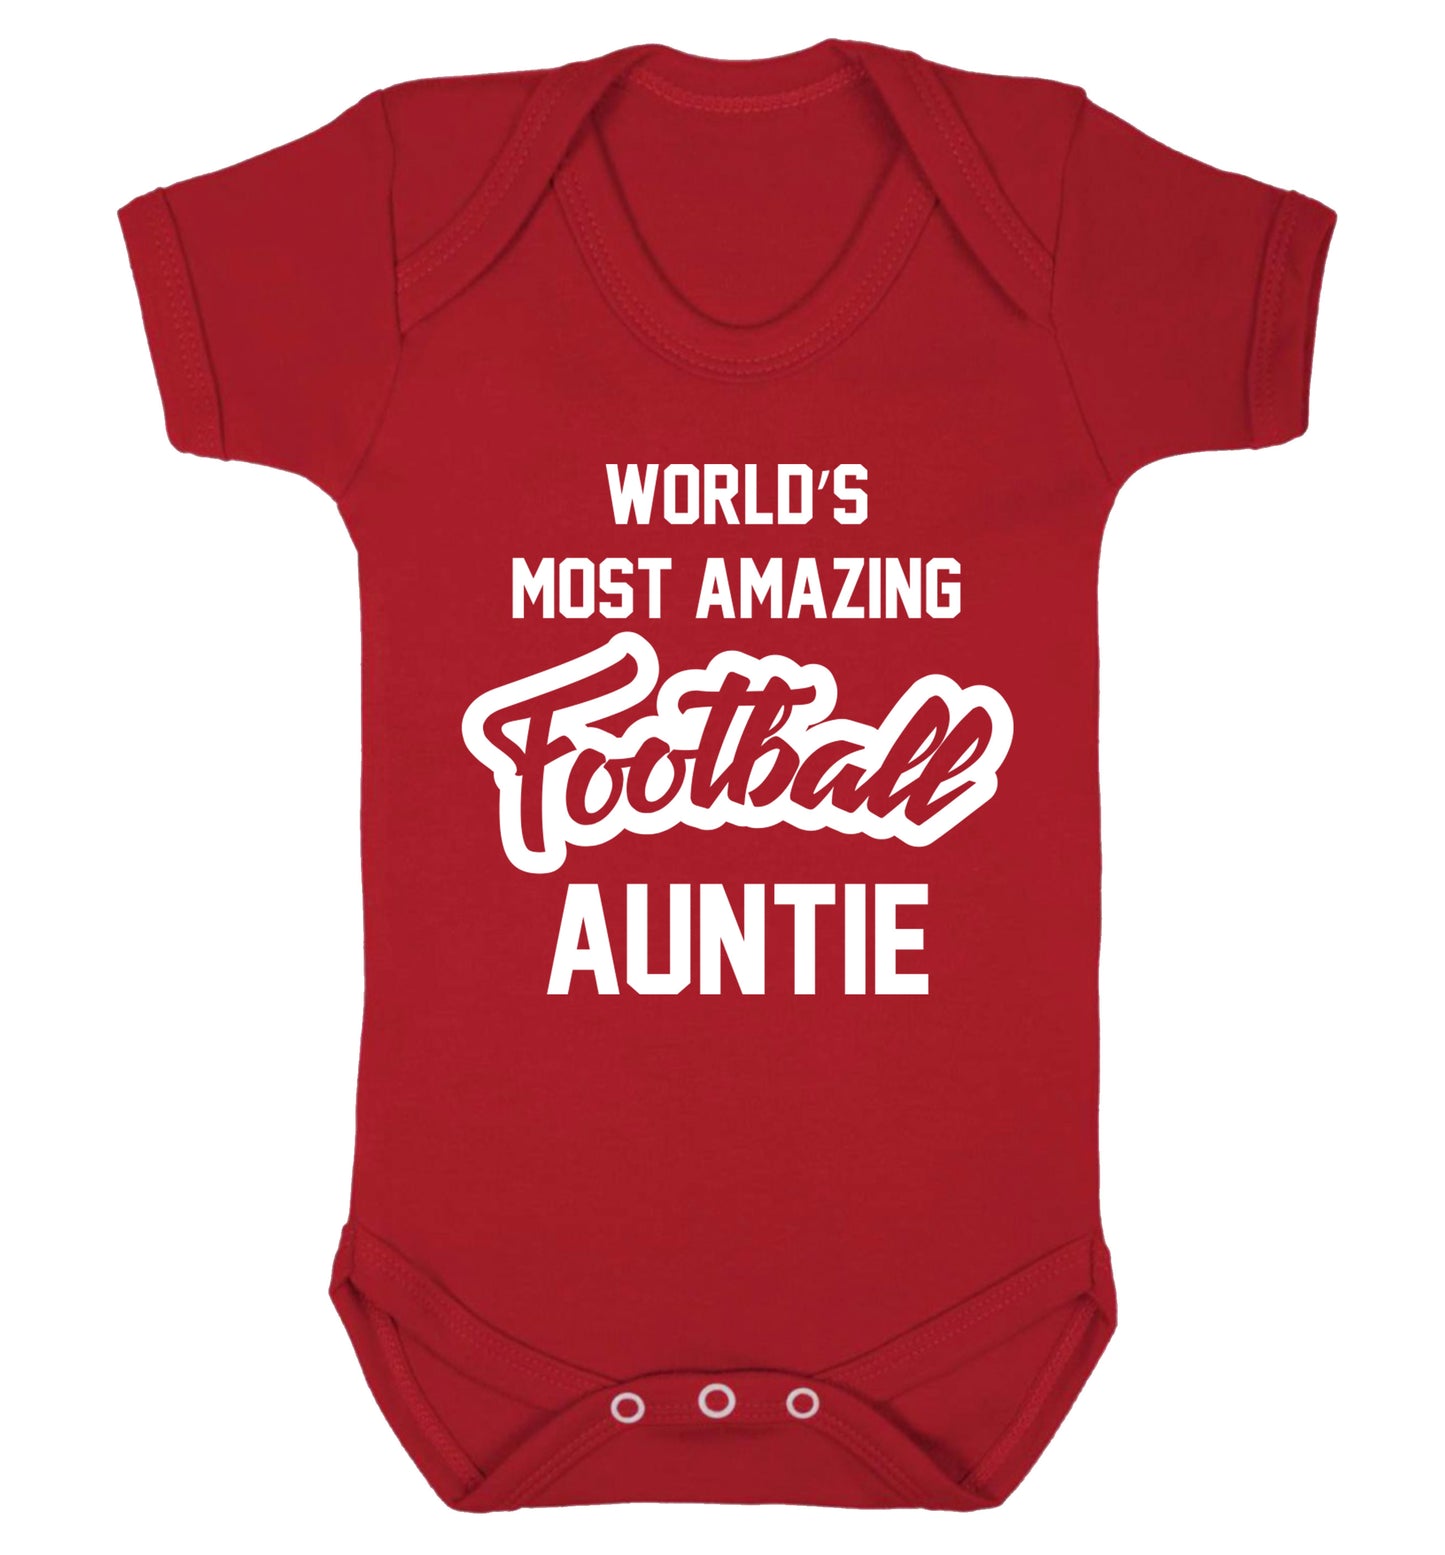 Worlds most amazing football auntie Baby Vest red 18-24 months